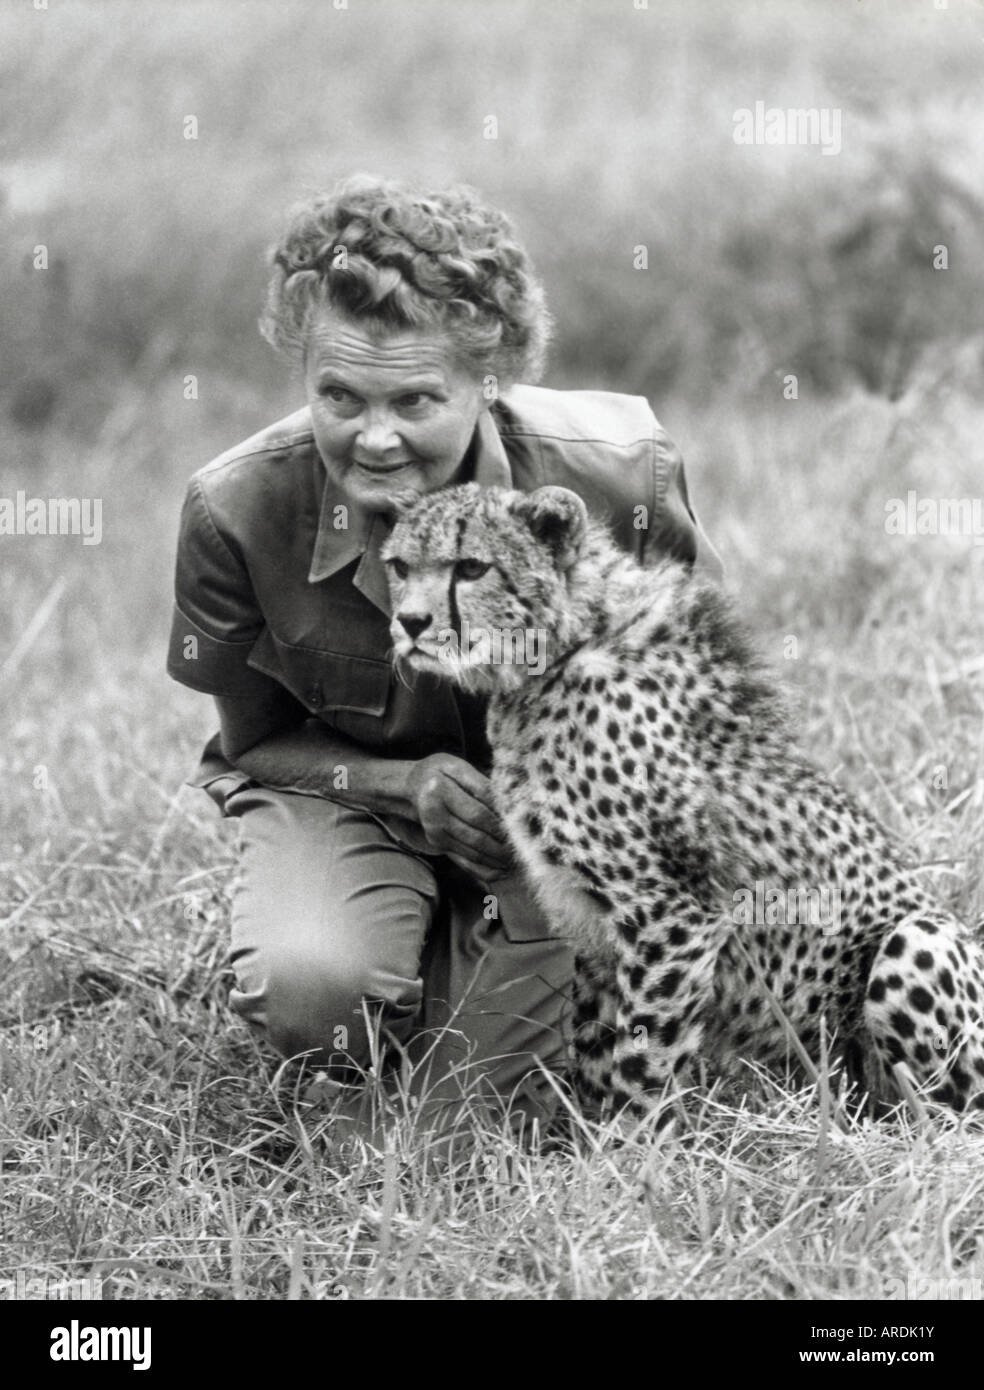 https://c8.alamy.com/comp/ARDK1Y/joy-adamson-famous-for-work-with-big-cats-posing-with-a-cheetah-ARDK1Y.jpg